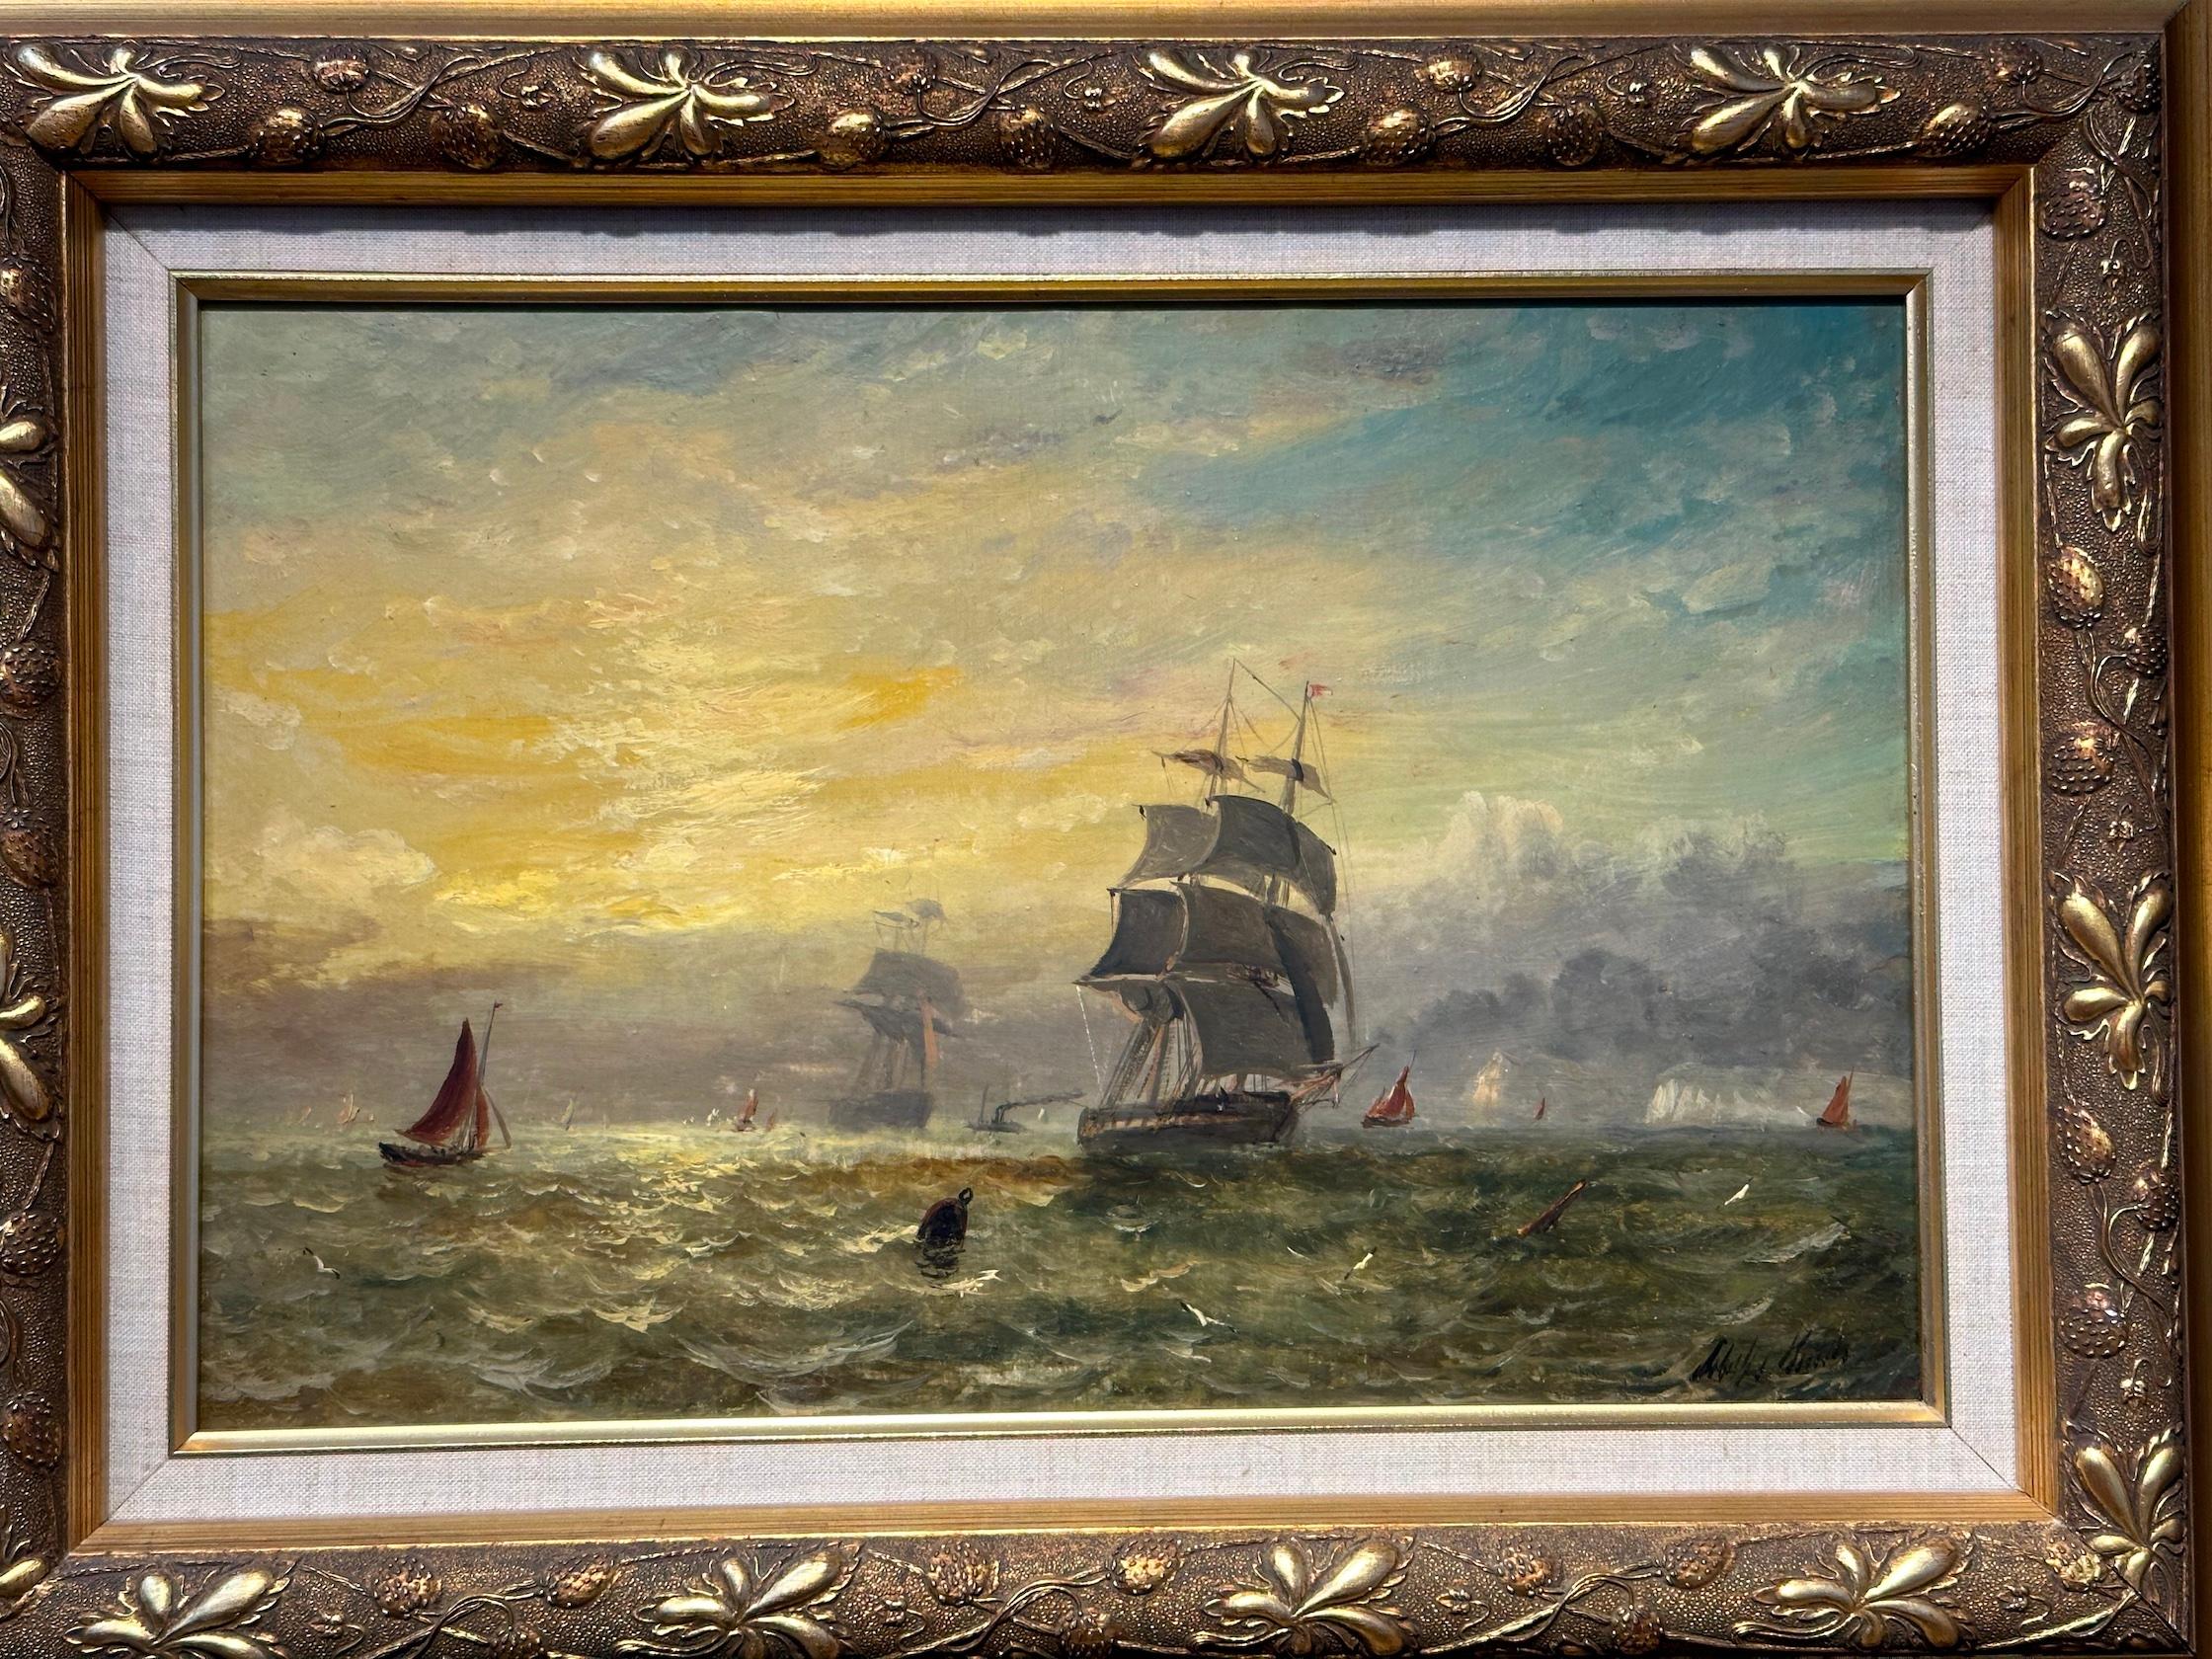 Antique Victorian, Impressionist 19th century English oil, Fishings boat at Sea - Painting by Adolphus Knell